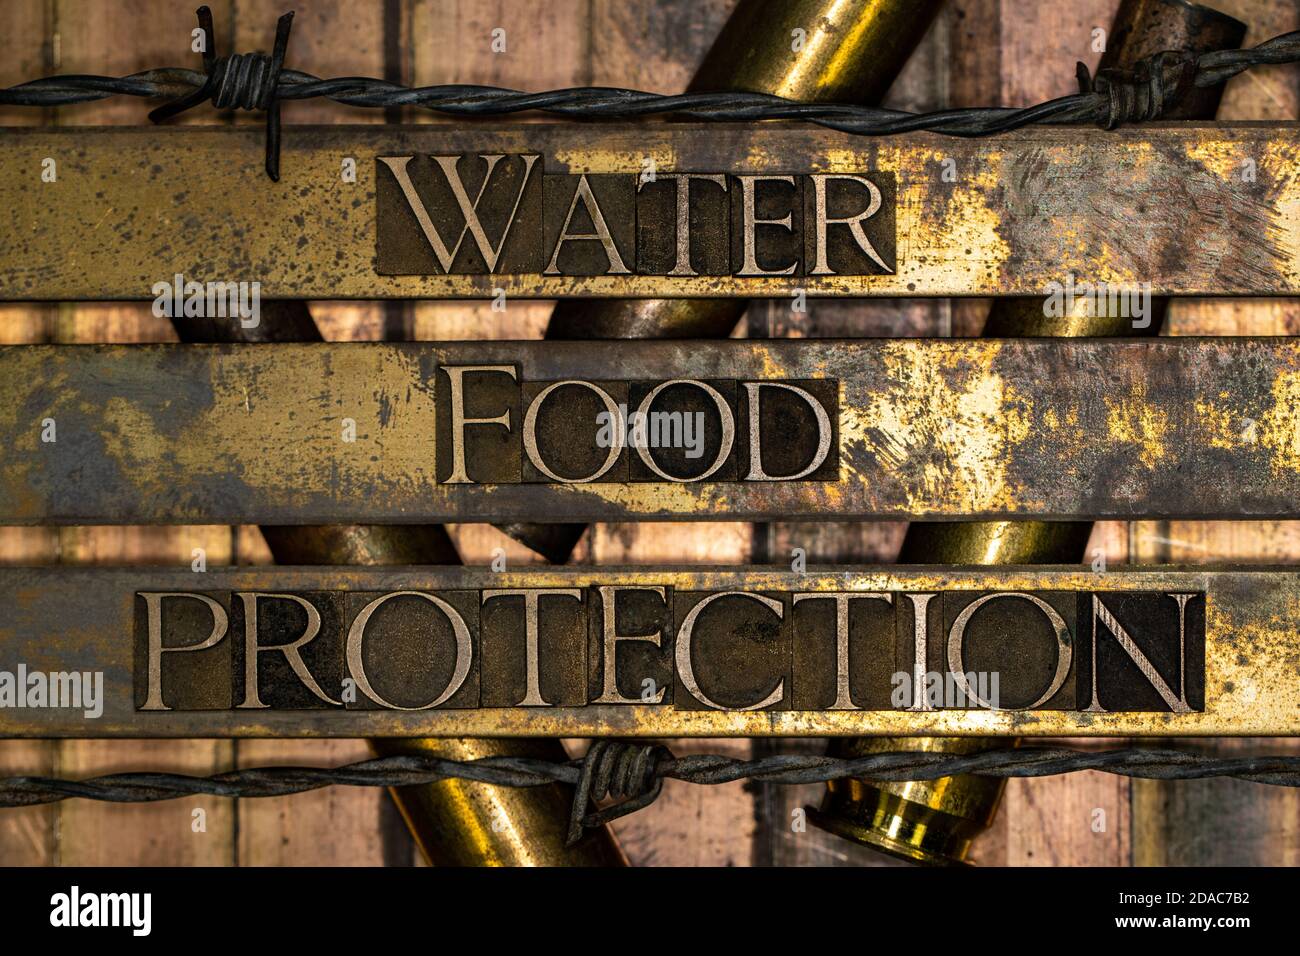 Water Food Protection text message over 50 caliber rifle cartridges on vintage textured grunge copper background lined with barbed wire Stock Photo